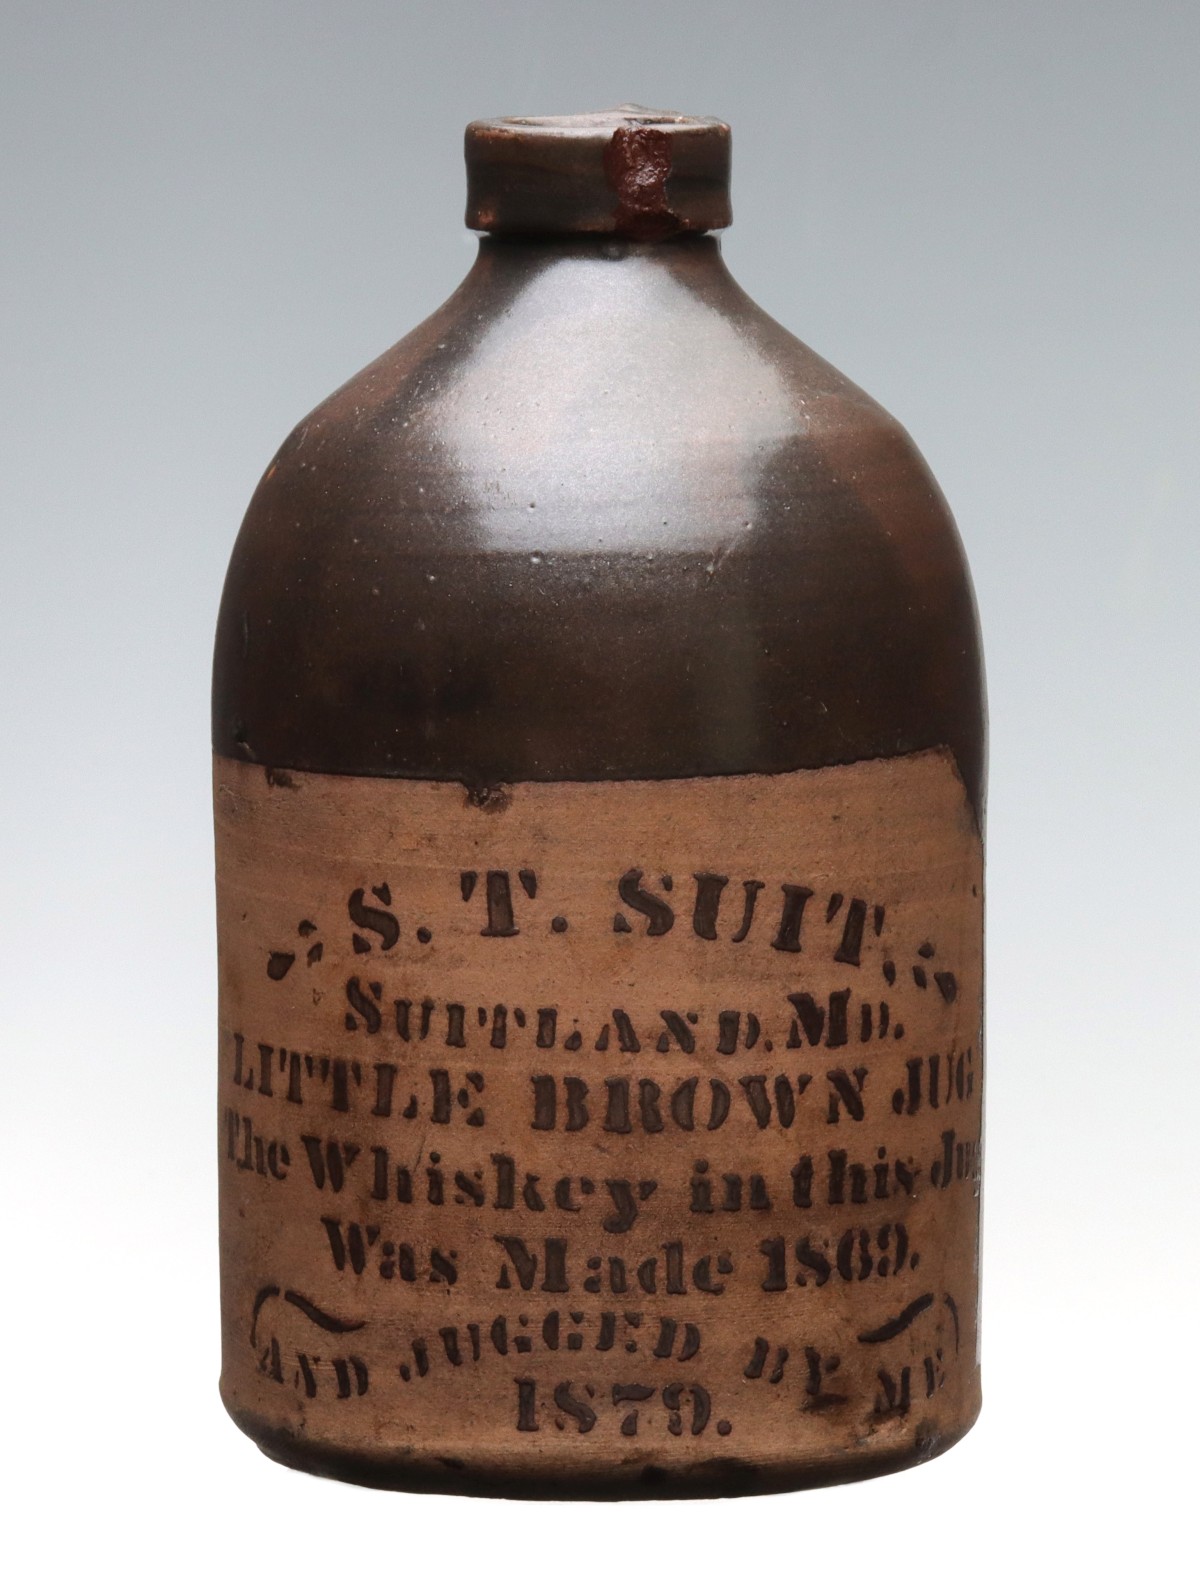 S.T. SUIT SUITLAND MD LITTLE BROWN WHISKEY JUG 1879